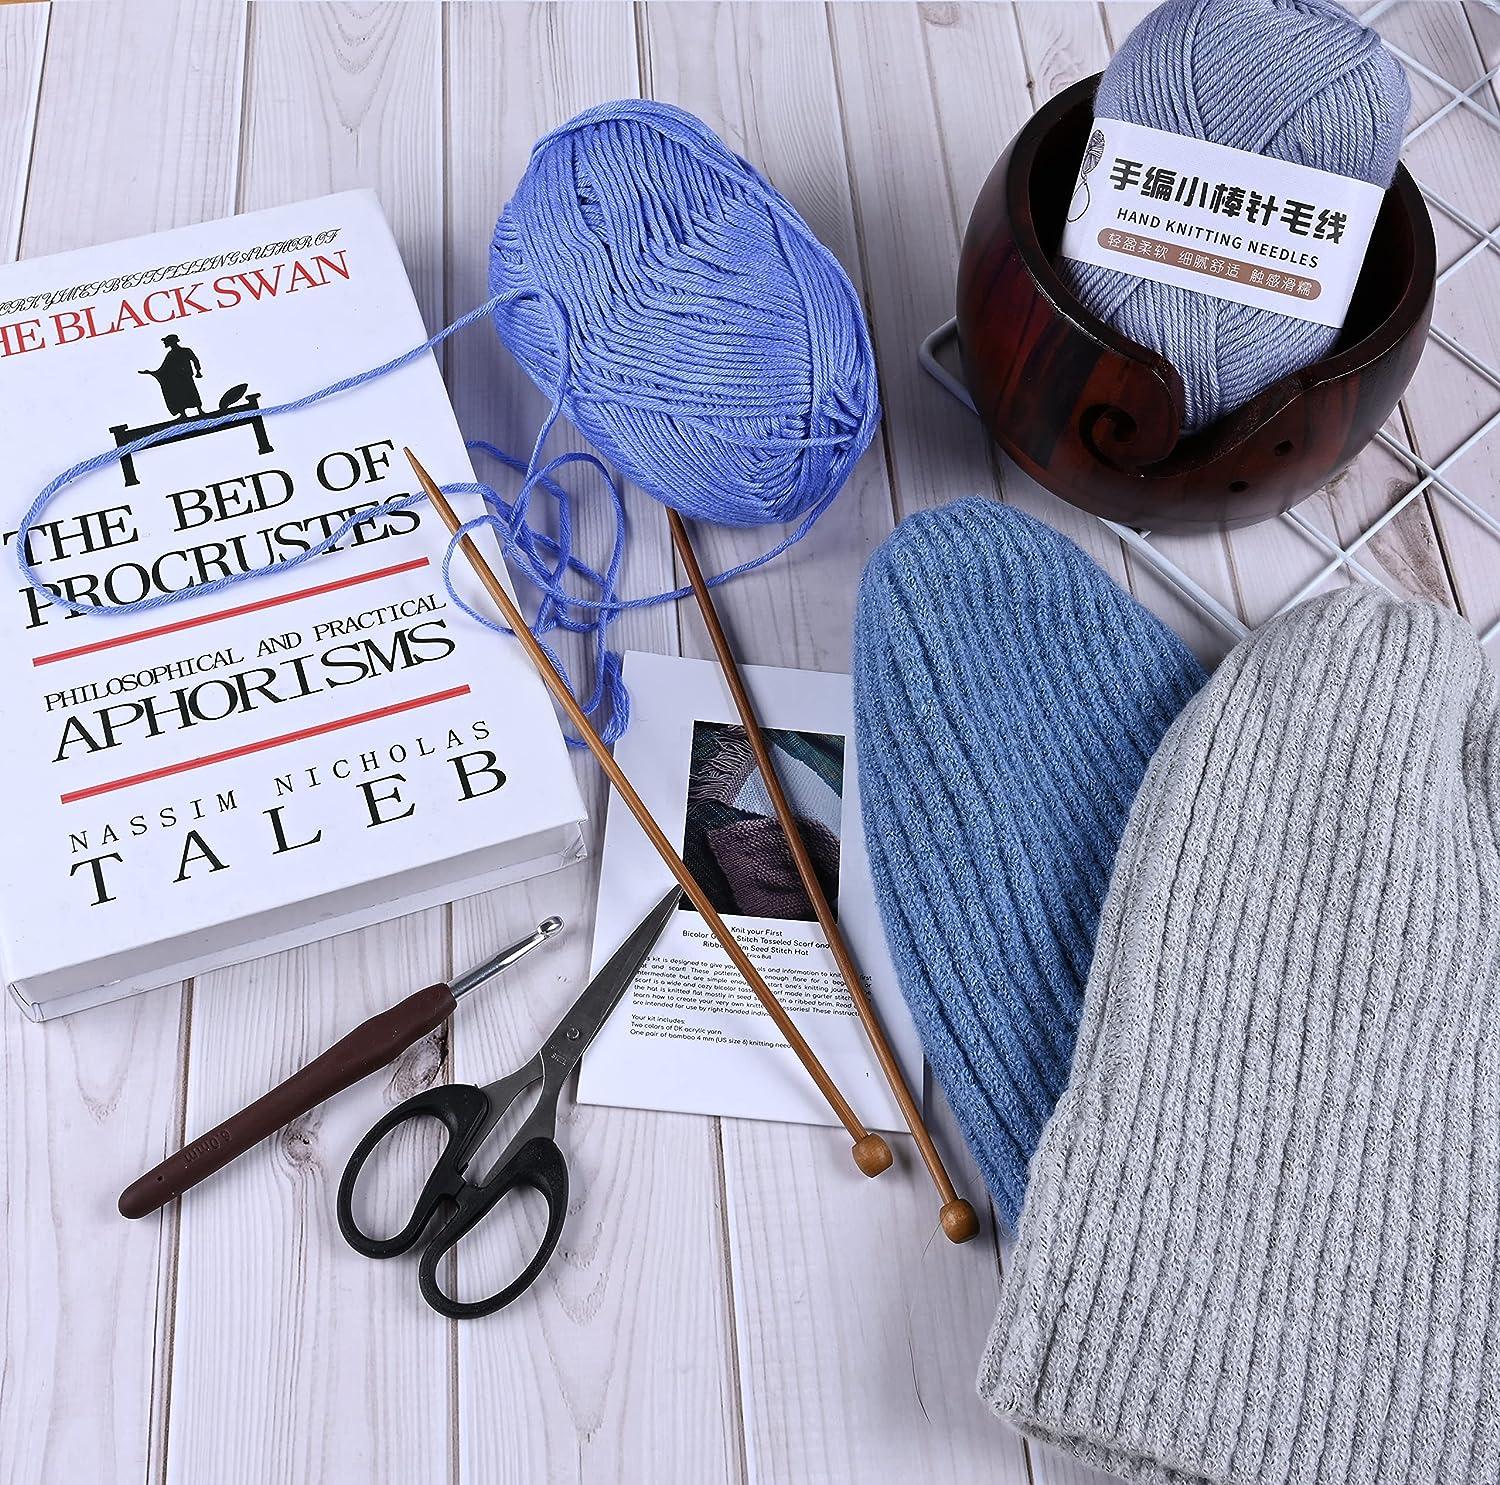 Beginners Knitting Kit, Learn to Knit, Knitting Gift Set, Craft Kit for  Kids, Craft Kit for Adults, Craft Kit, Learn to Knit 